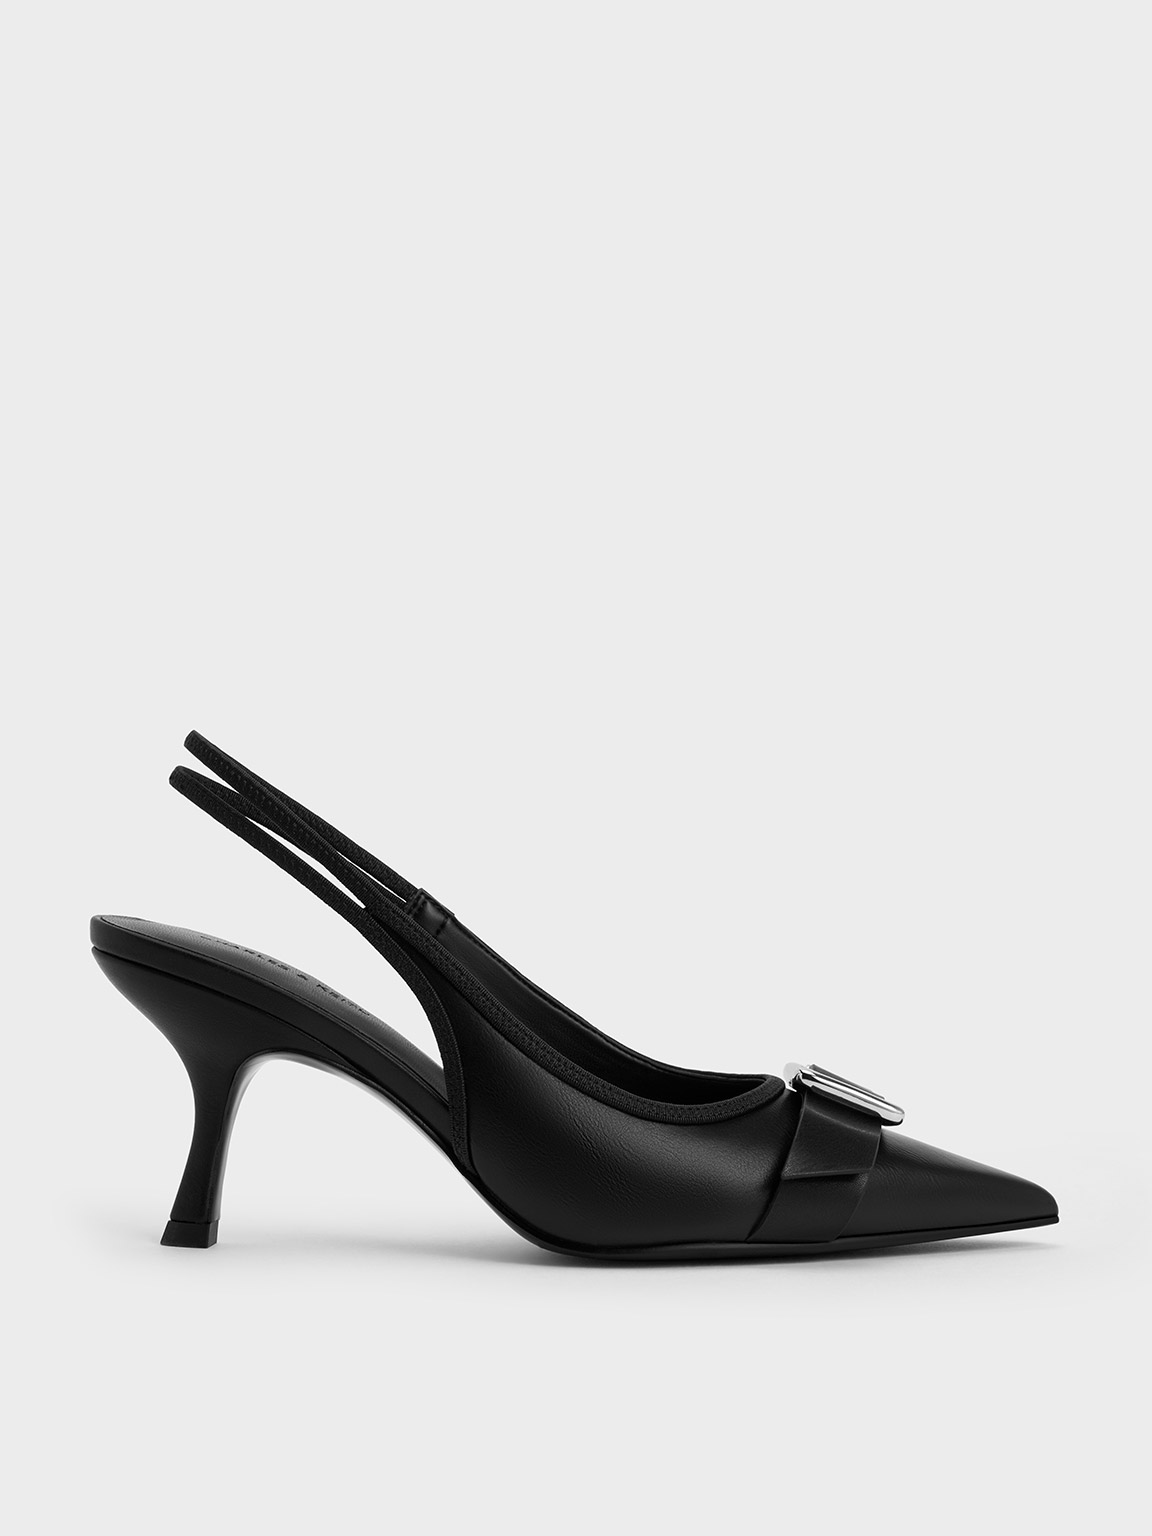 Buckled Pointed-Toe Slingback Pumps